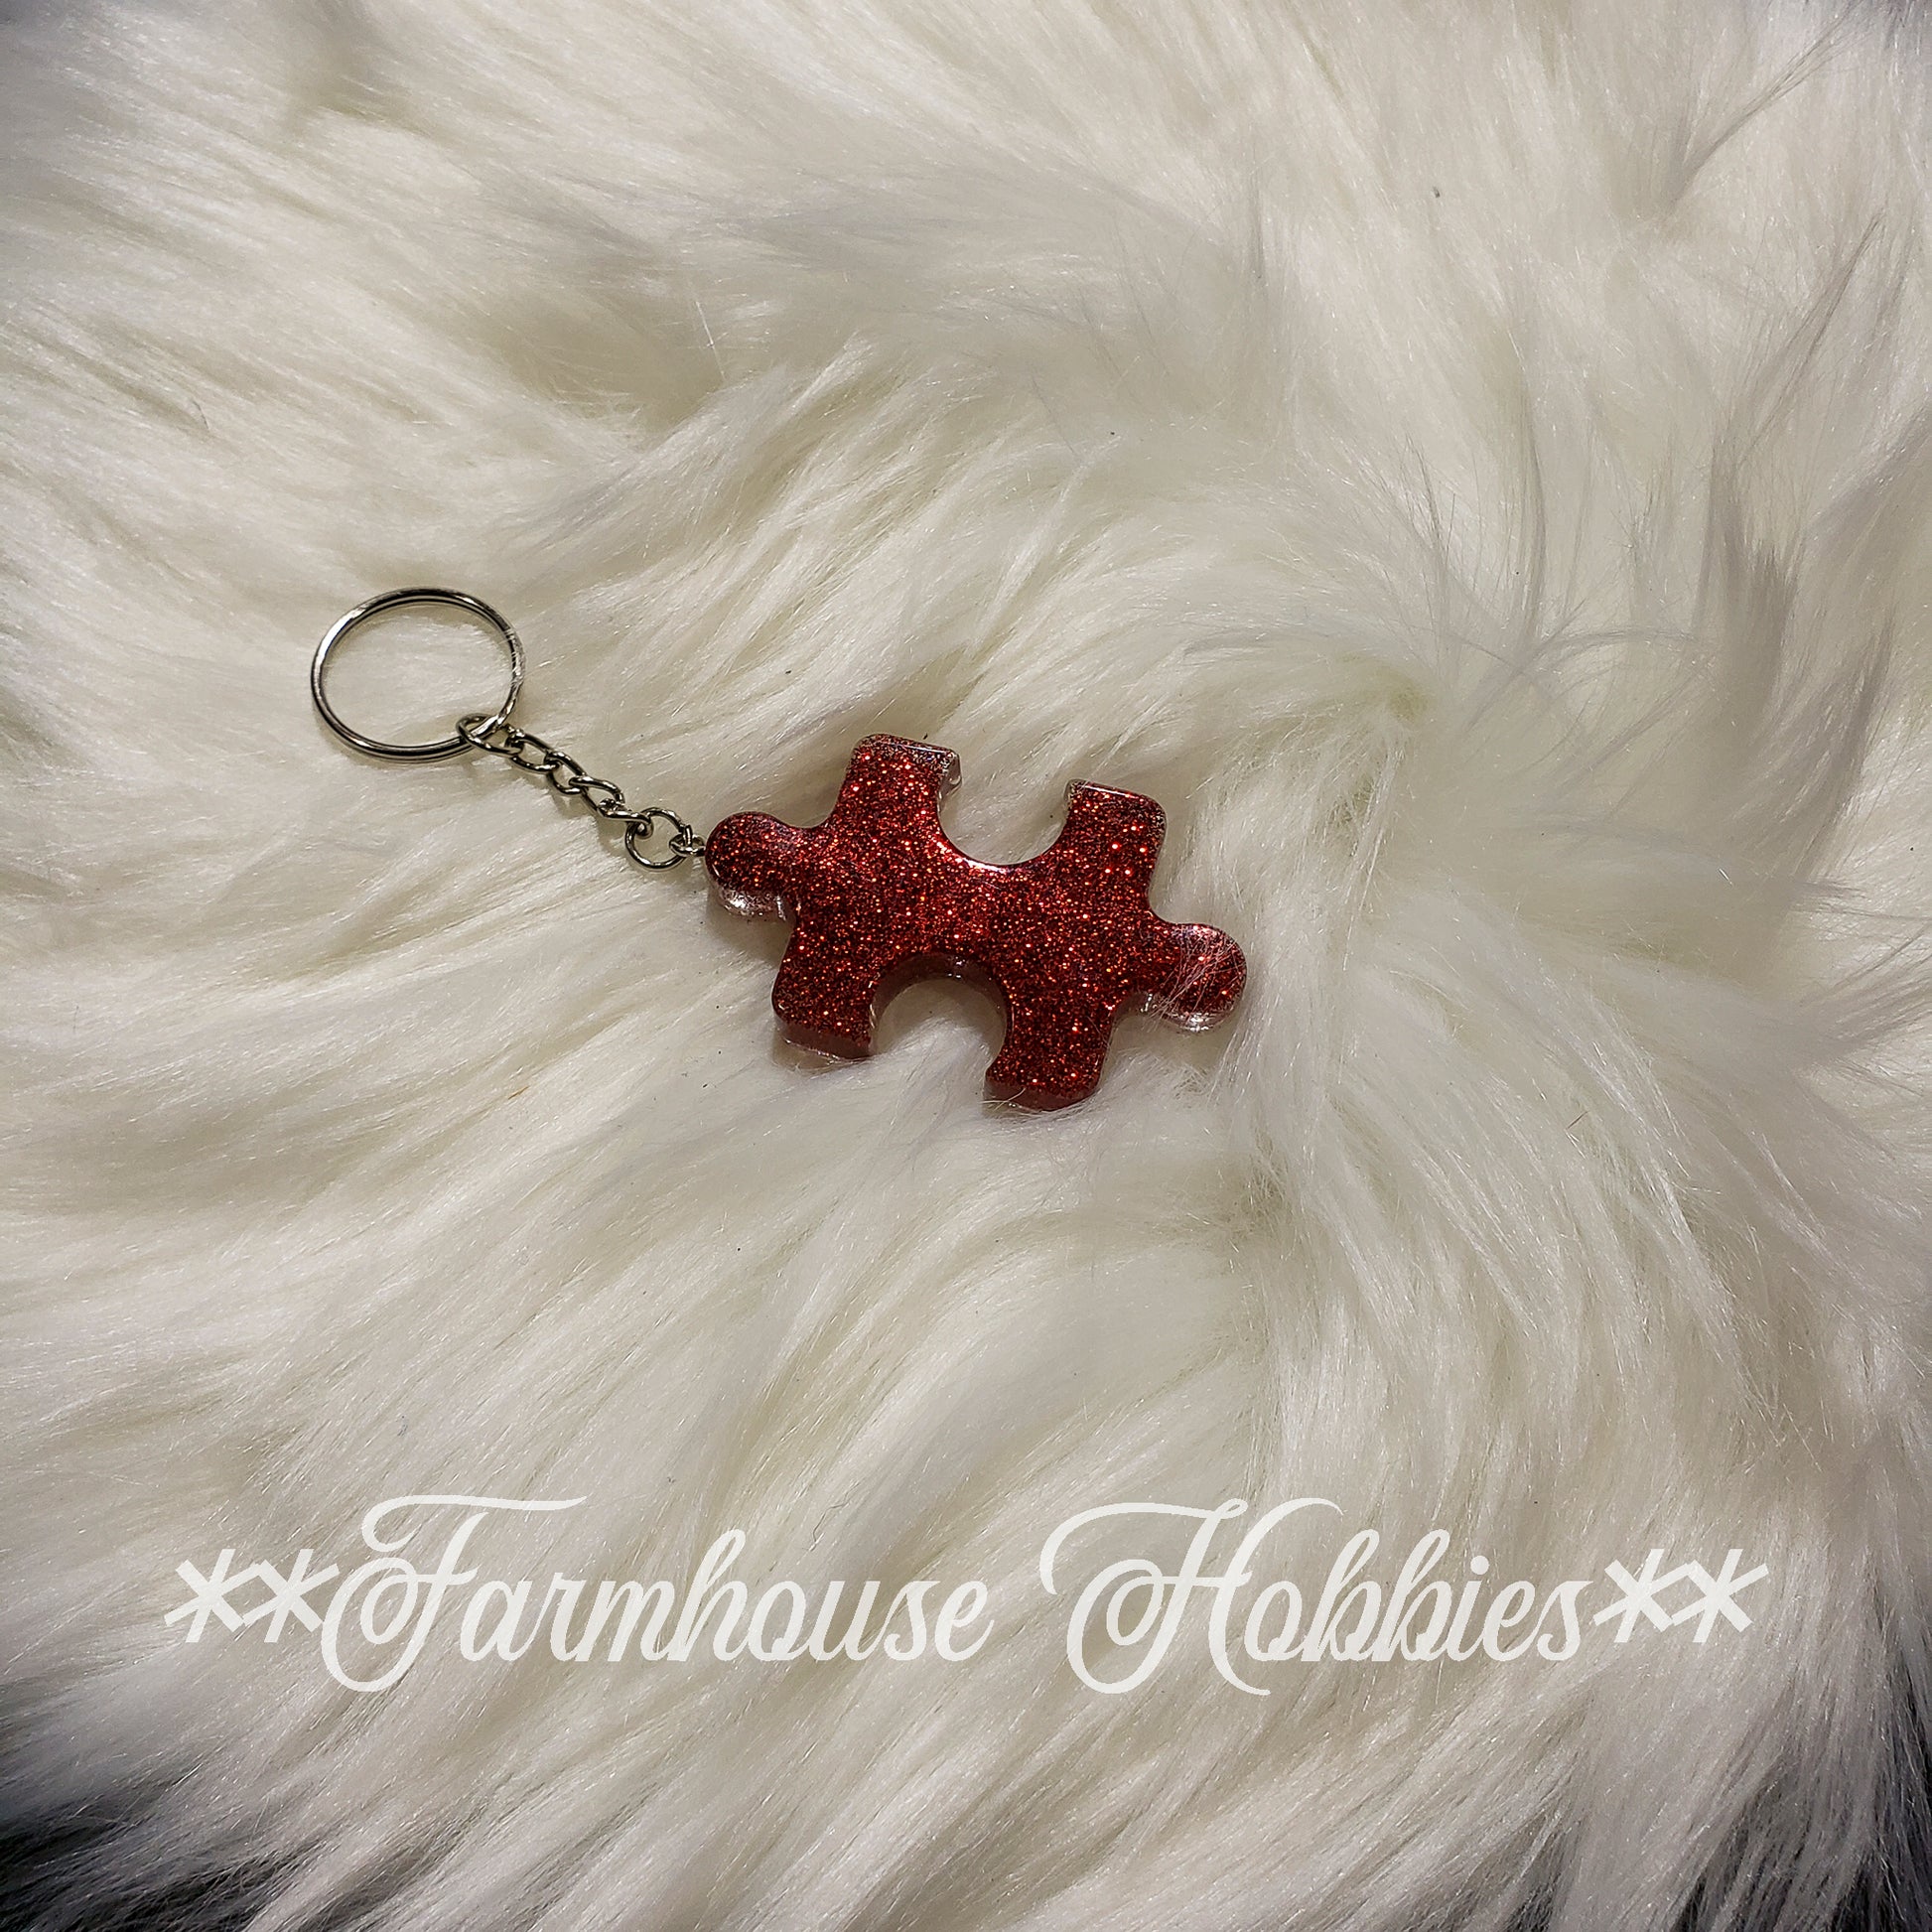 Puzzle Piece Keychain - Red Home Decor/Accessories Farmhouse Hobbies   